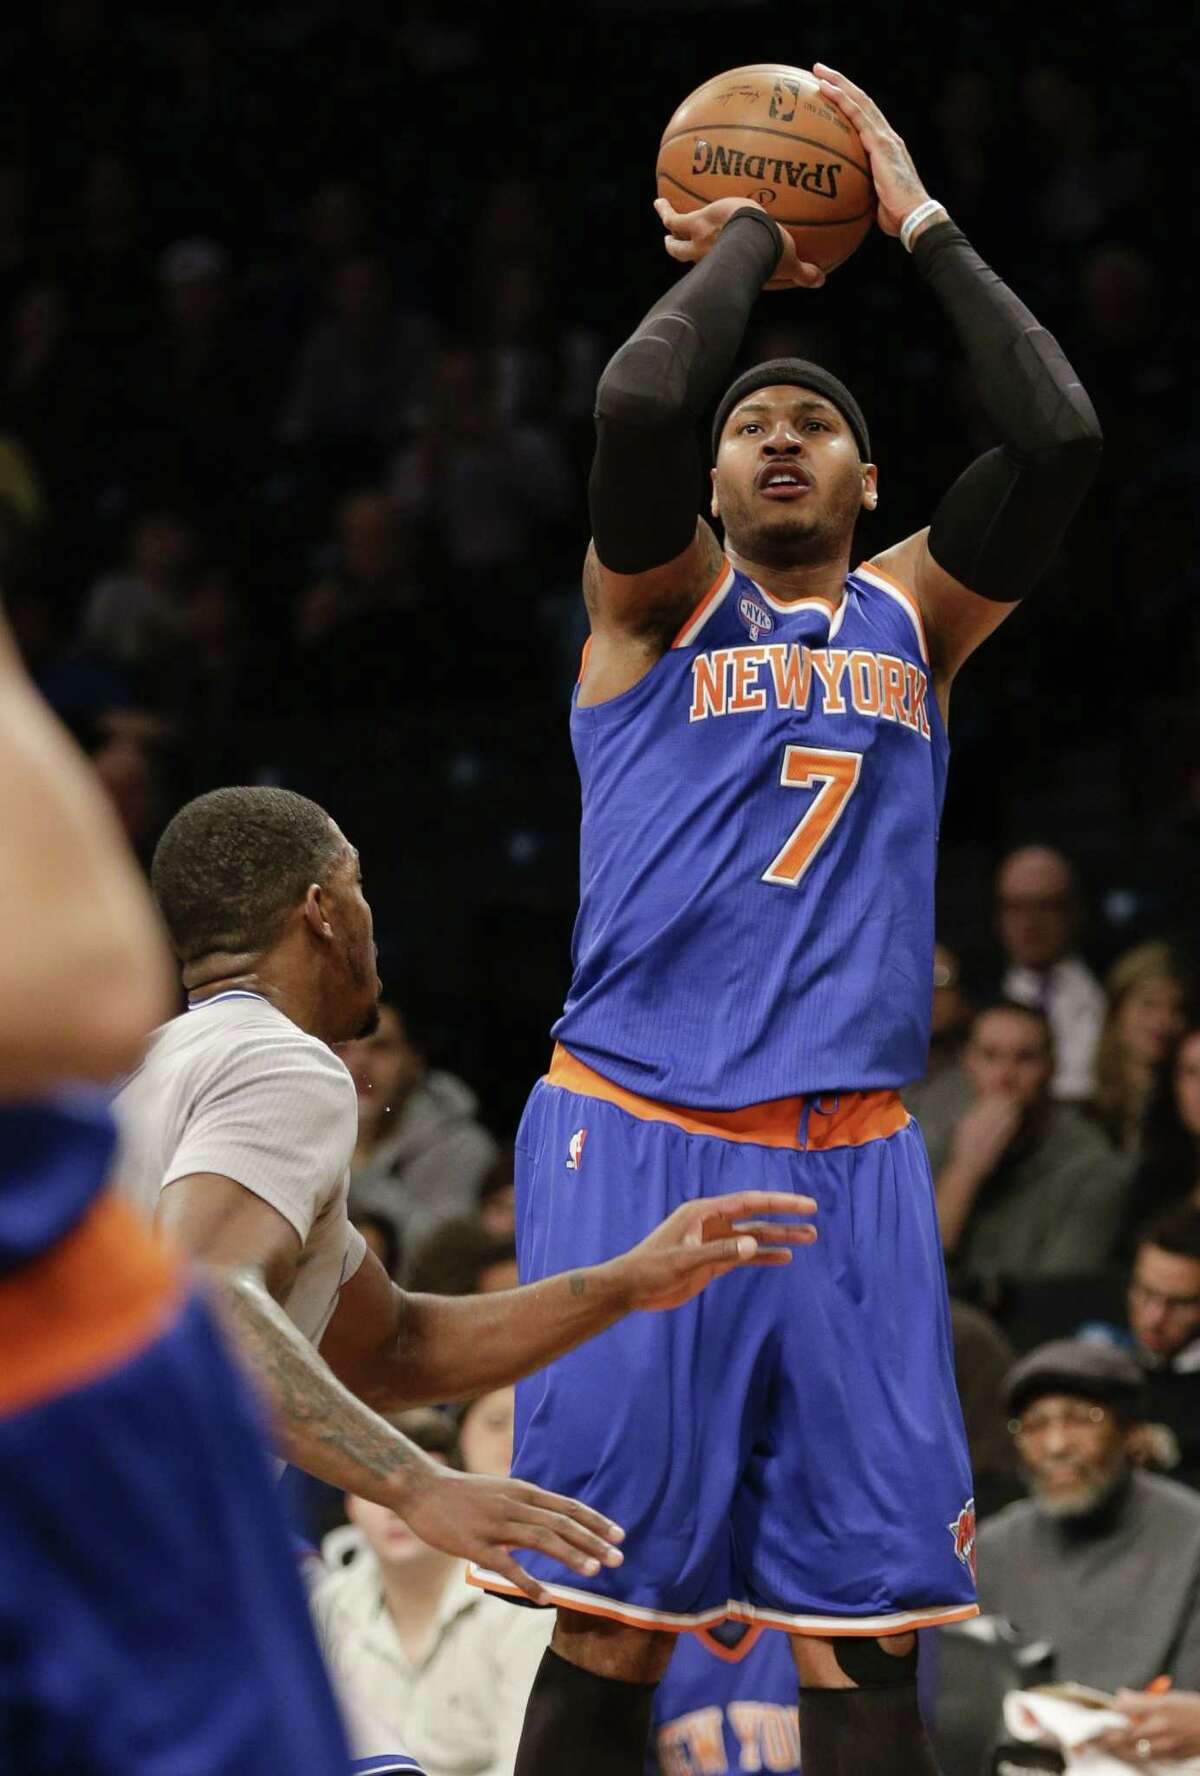 The Knicks’ Carmelo Anthony (7) shoots during a recent game.